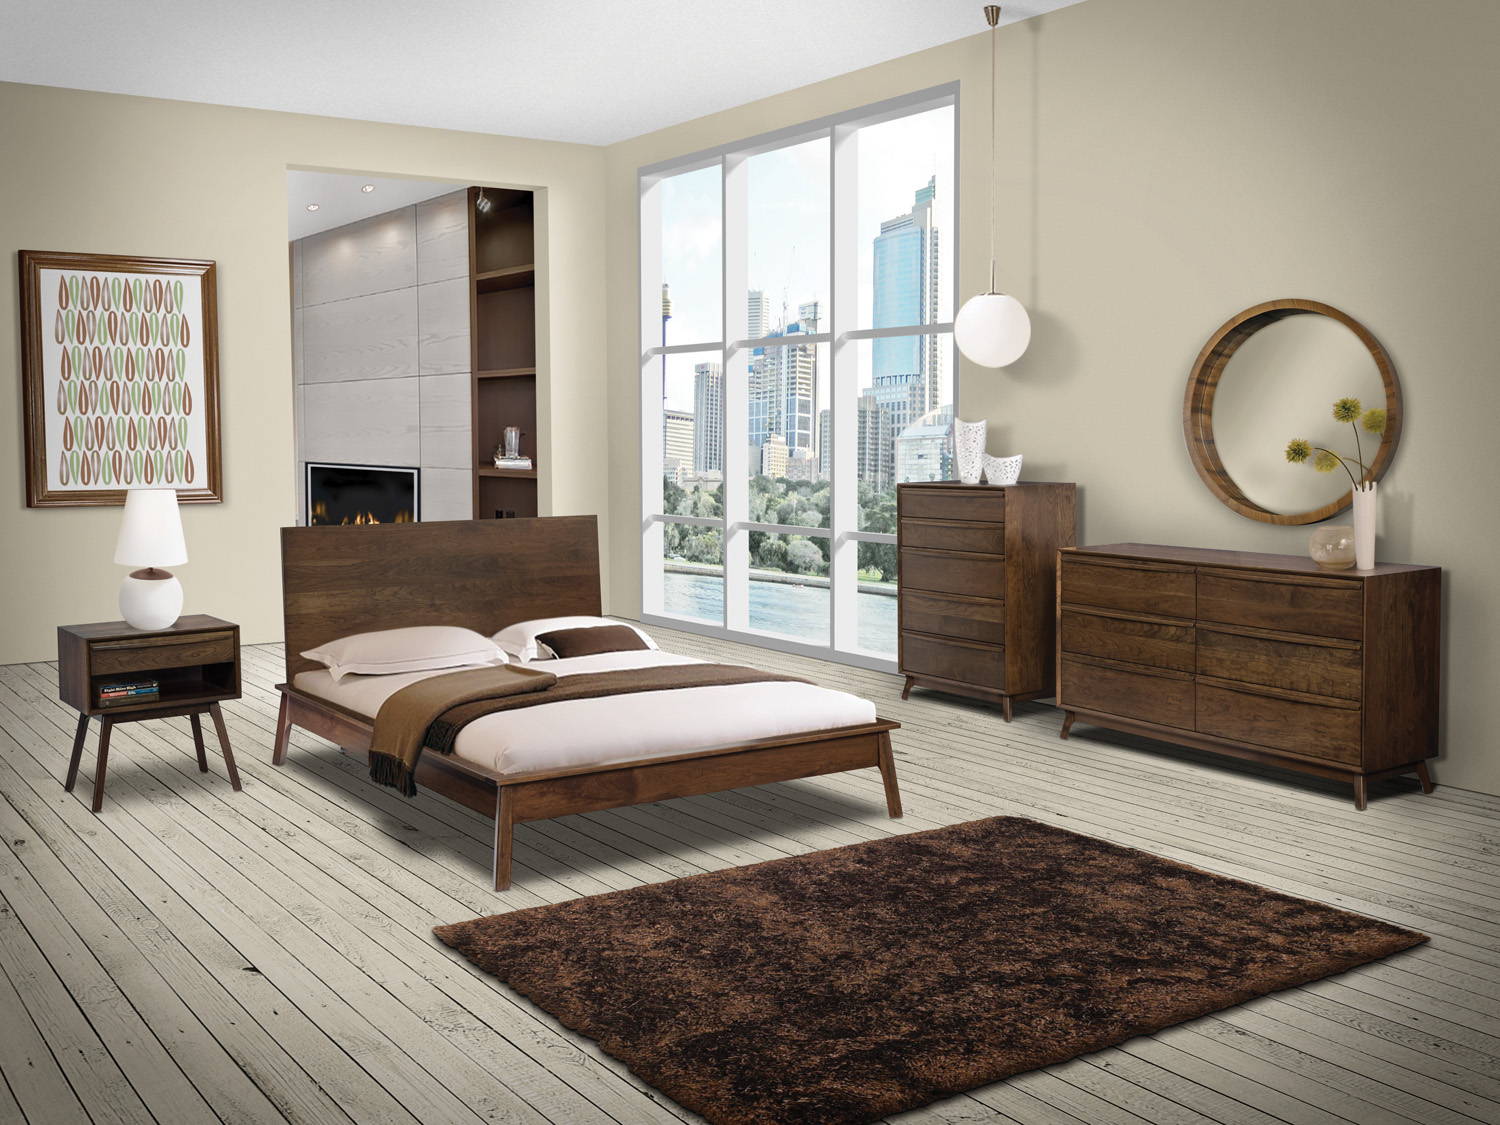 Image of fully customizable Cambridge Bedroom Set through Harvest Home Interiors Amish Solid Wood Furniture